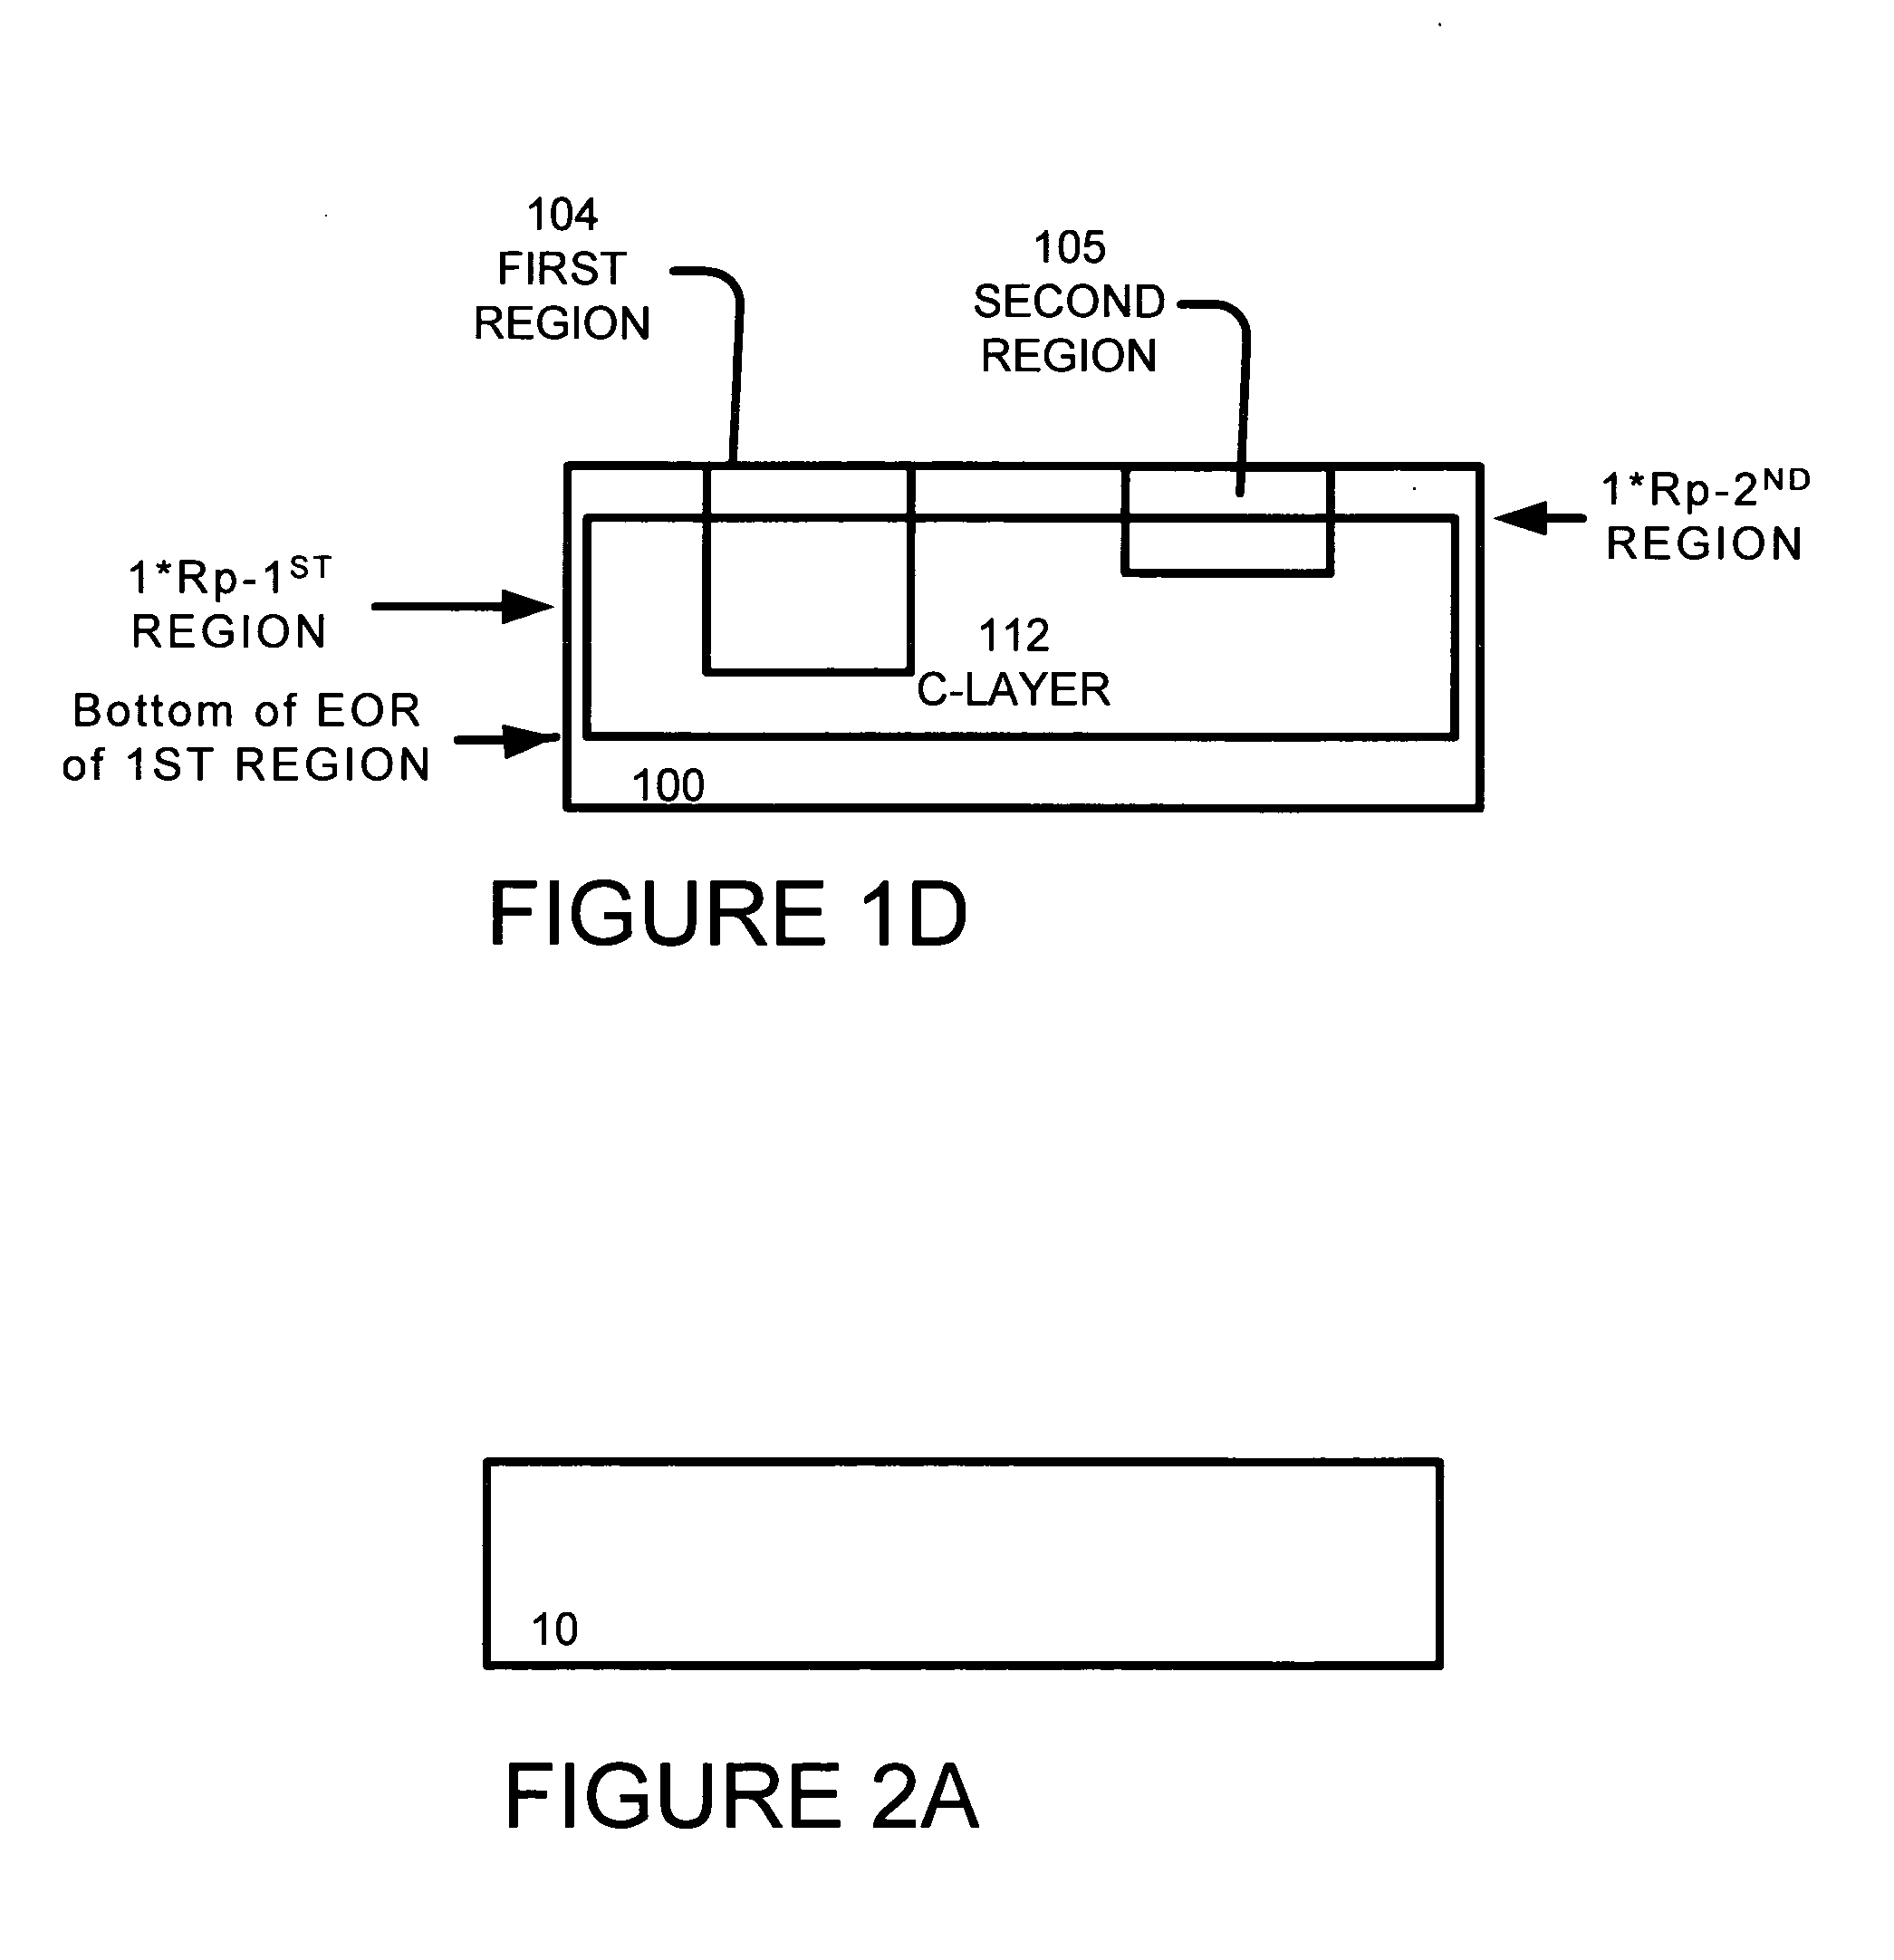 Material architecture for the fabrication of low temperature transistor